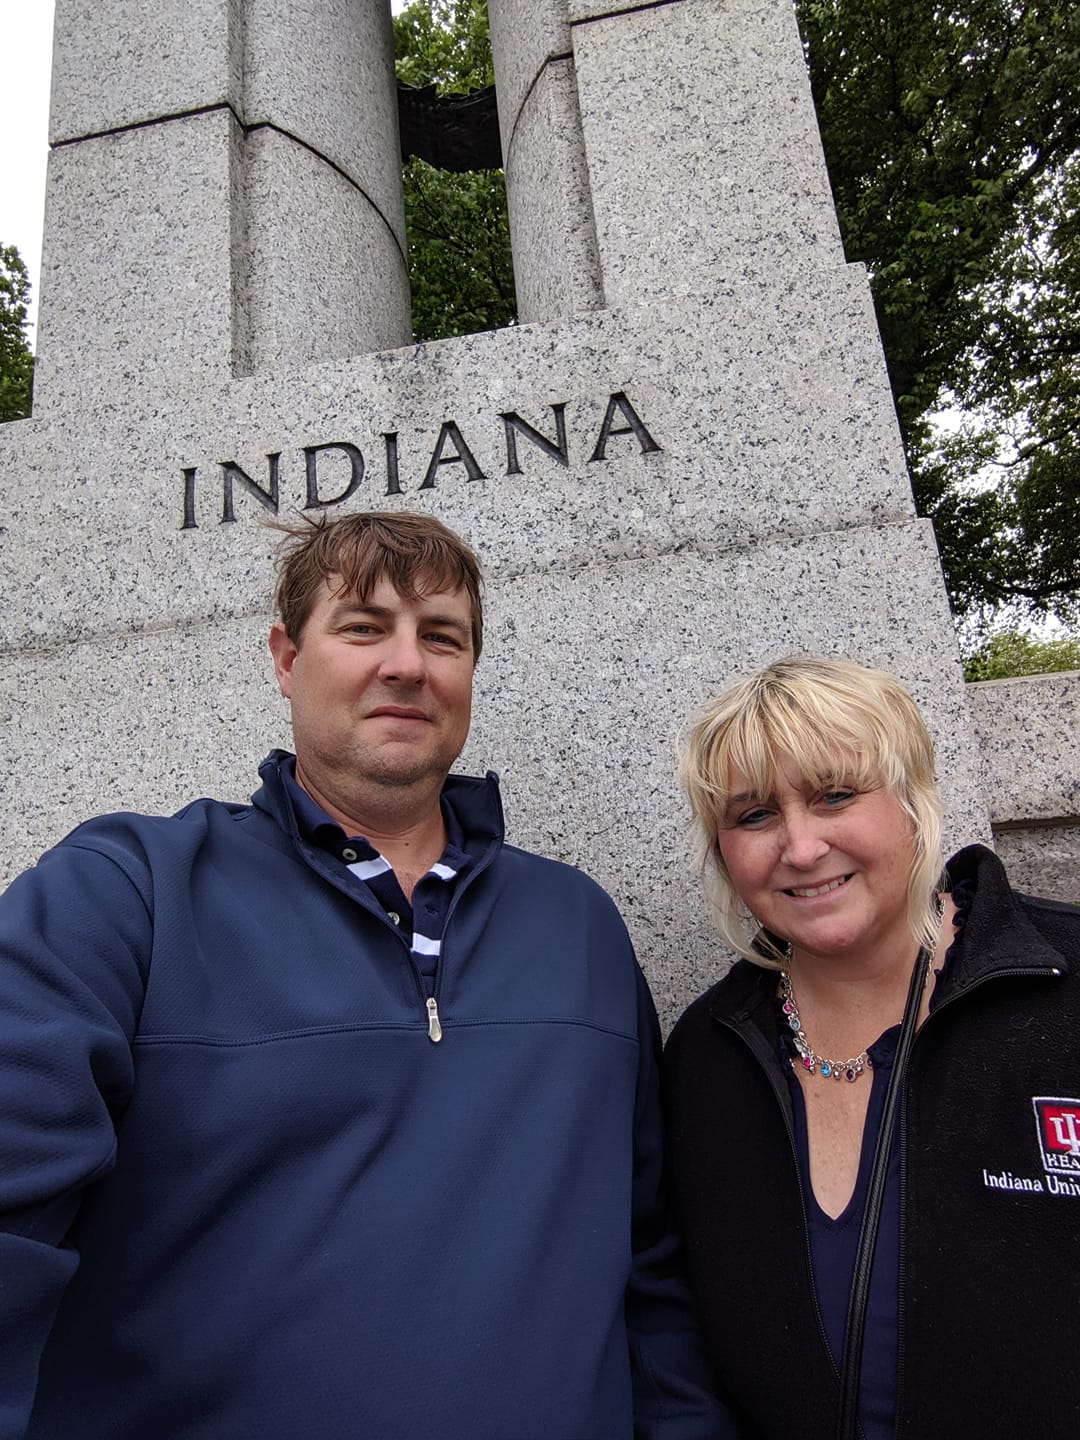 Jason and Katie Maxwell standing in front of Indiana sign